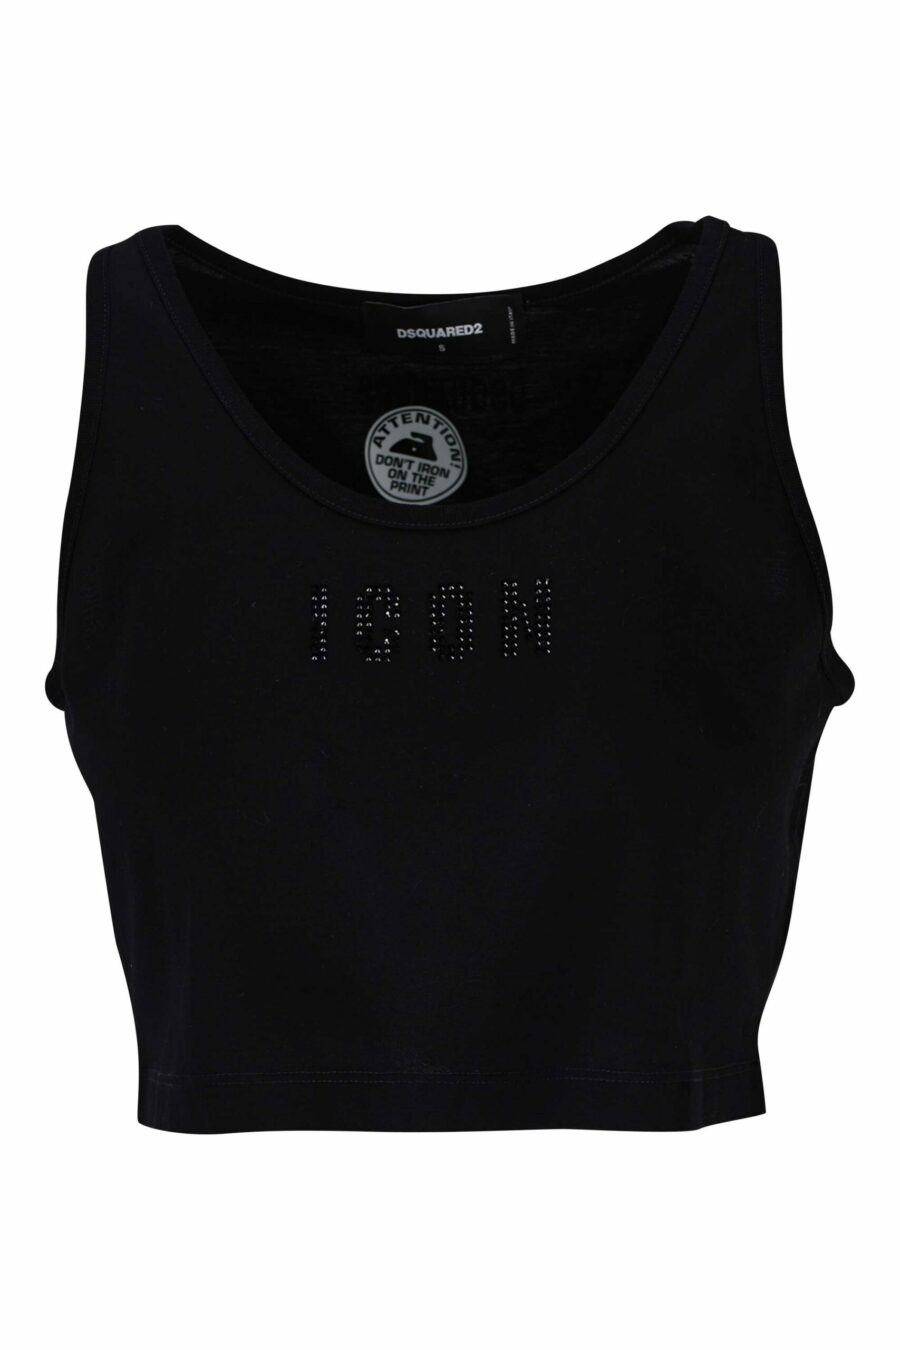 Short black top with mini logo "icon" - 8054148005948 scaled